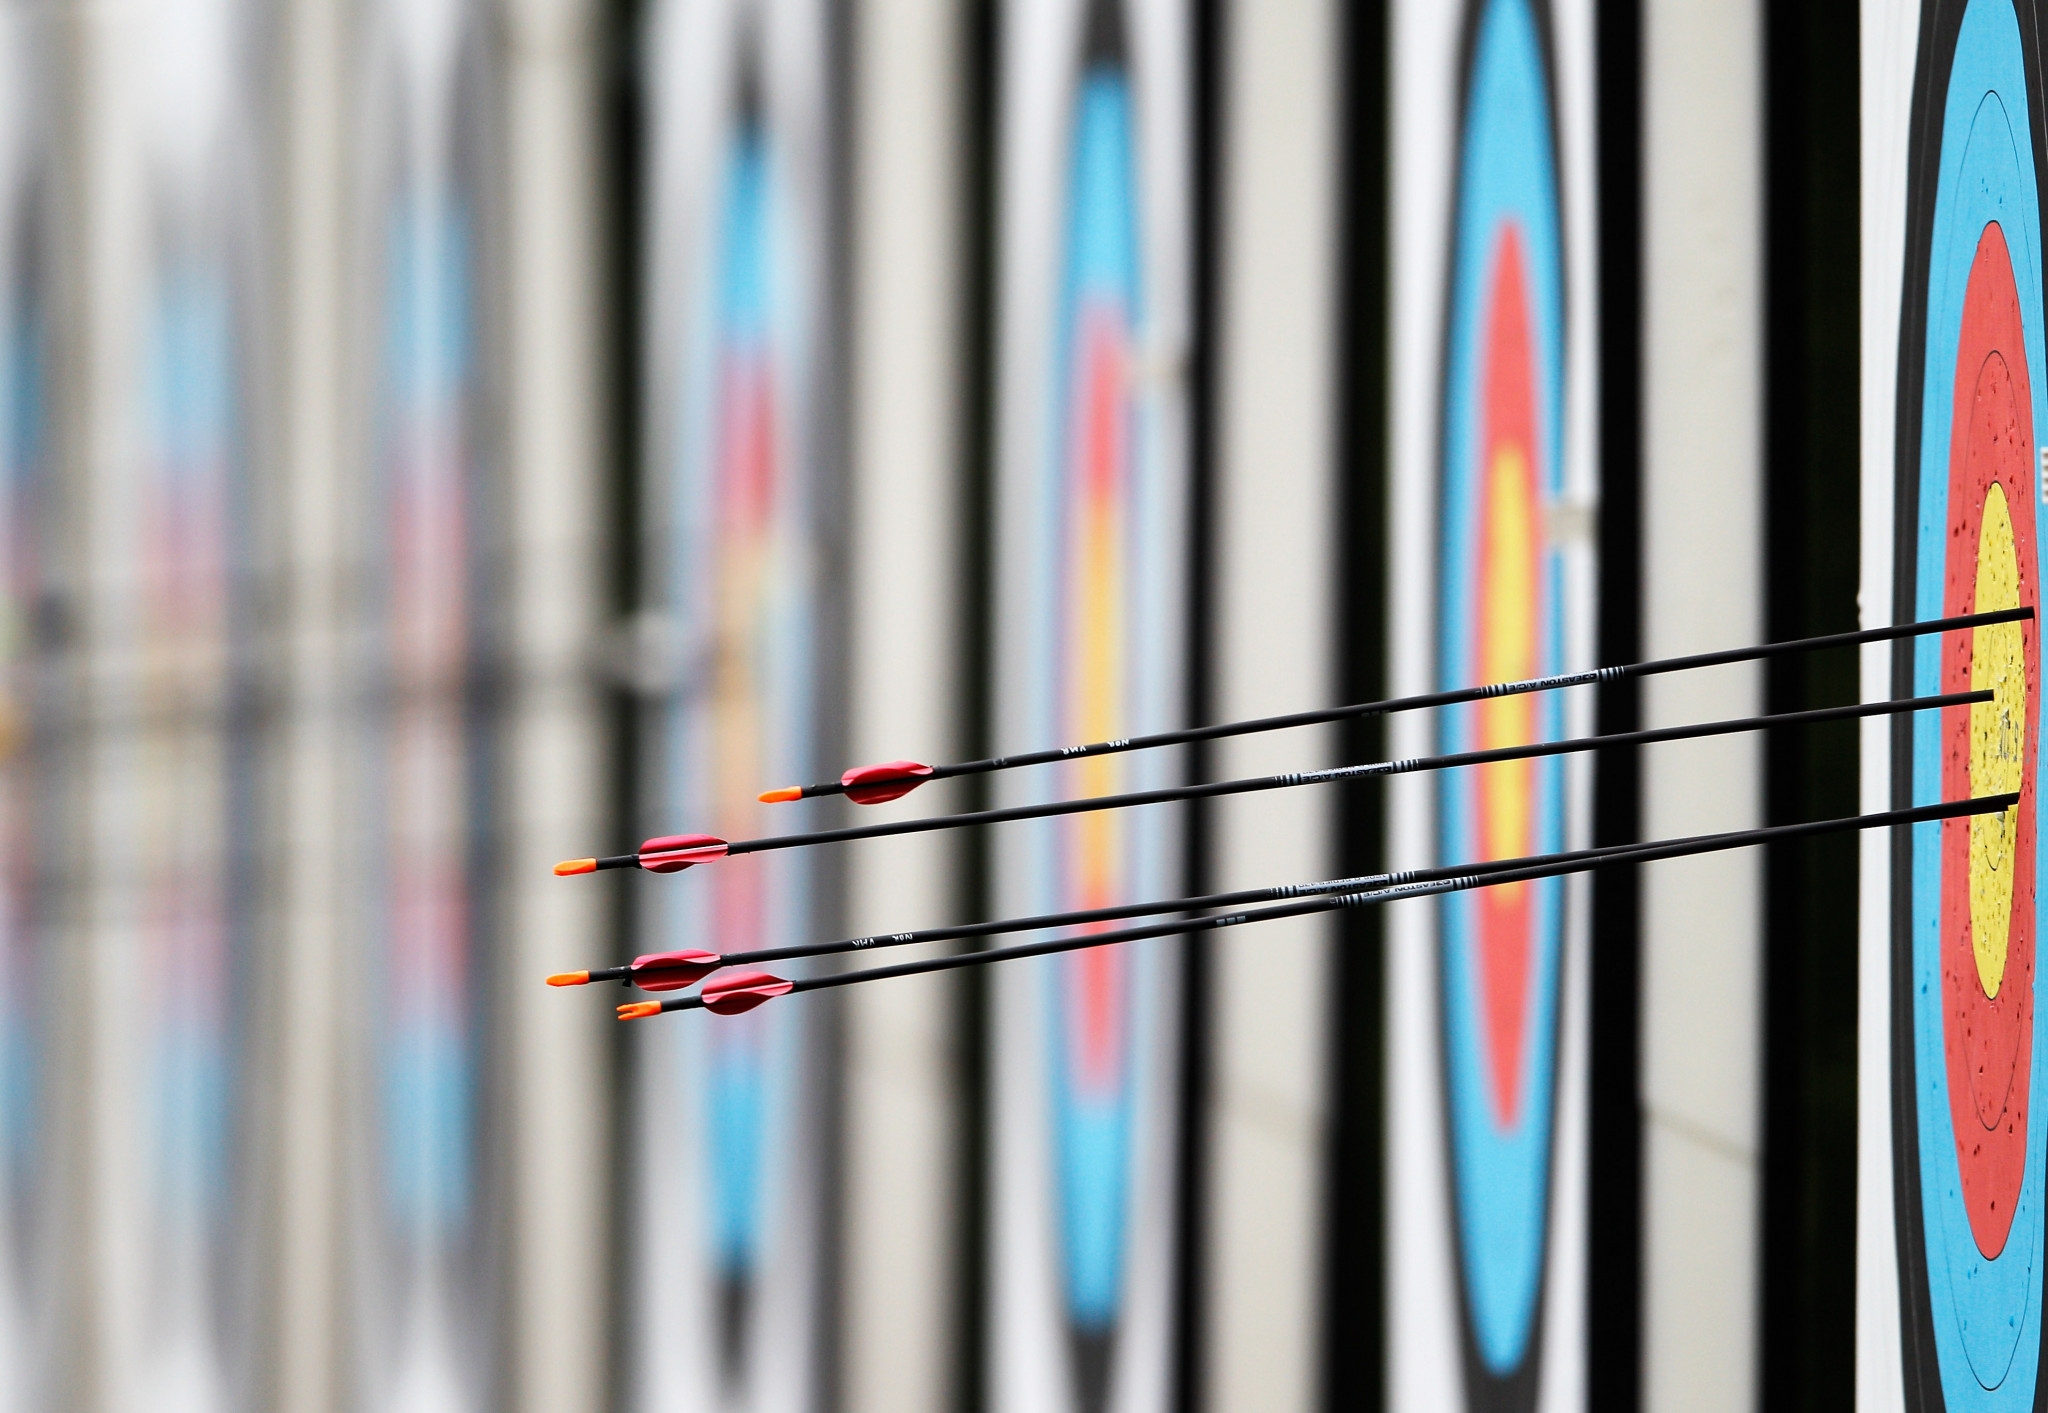 Team compound finals have been confirmed at the Archery World Cup in Medellín ©Getty Images